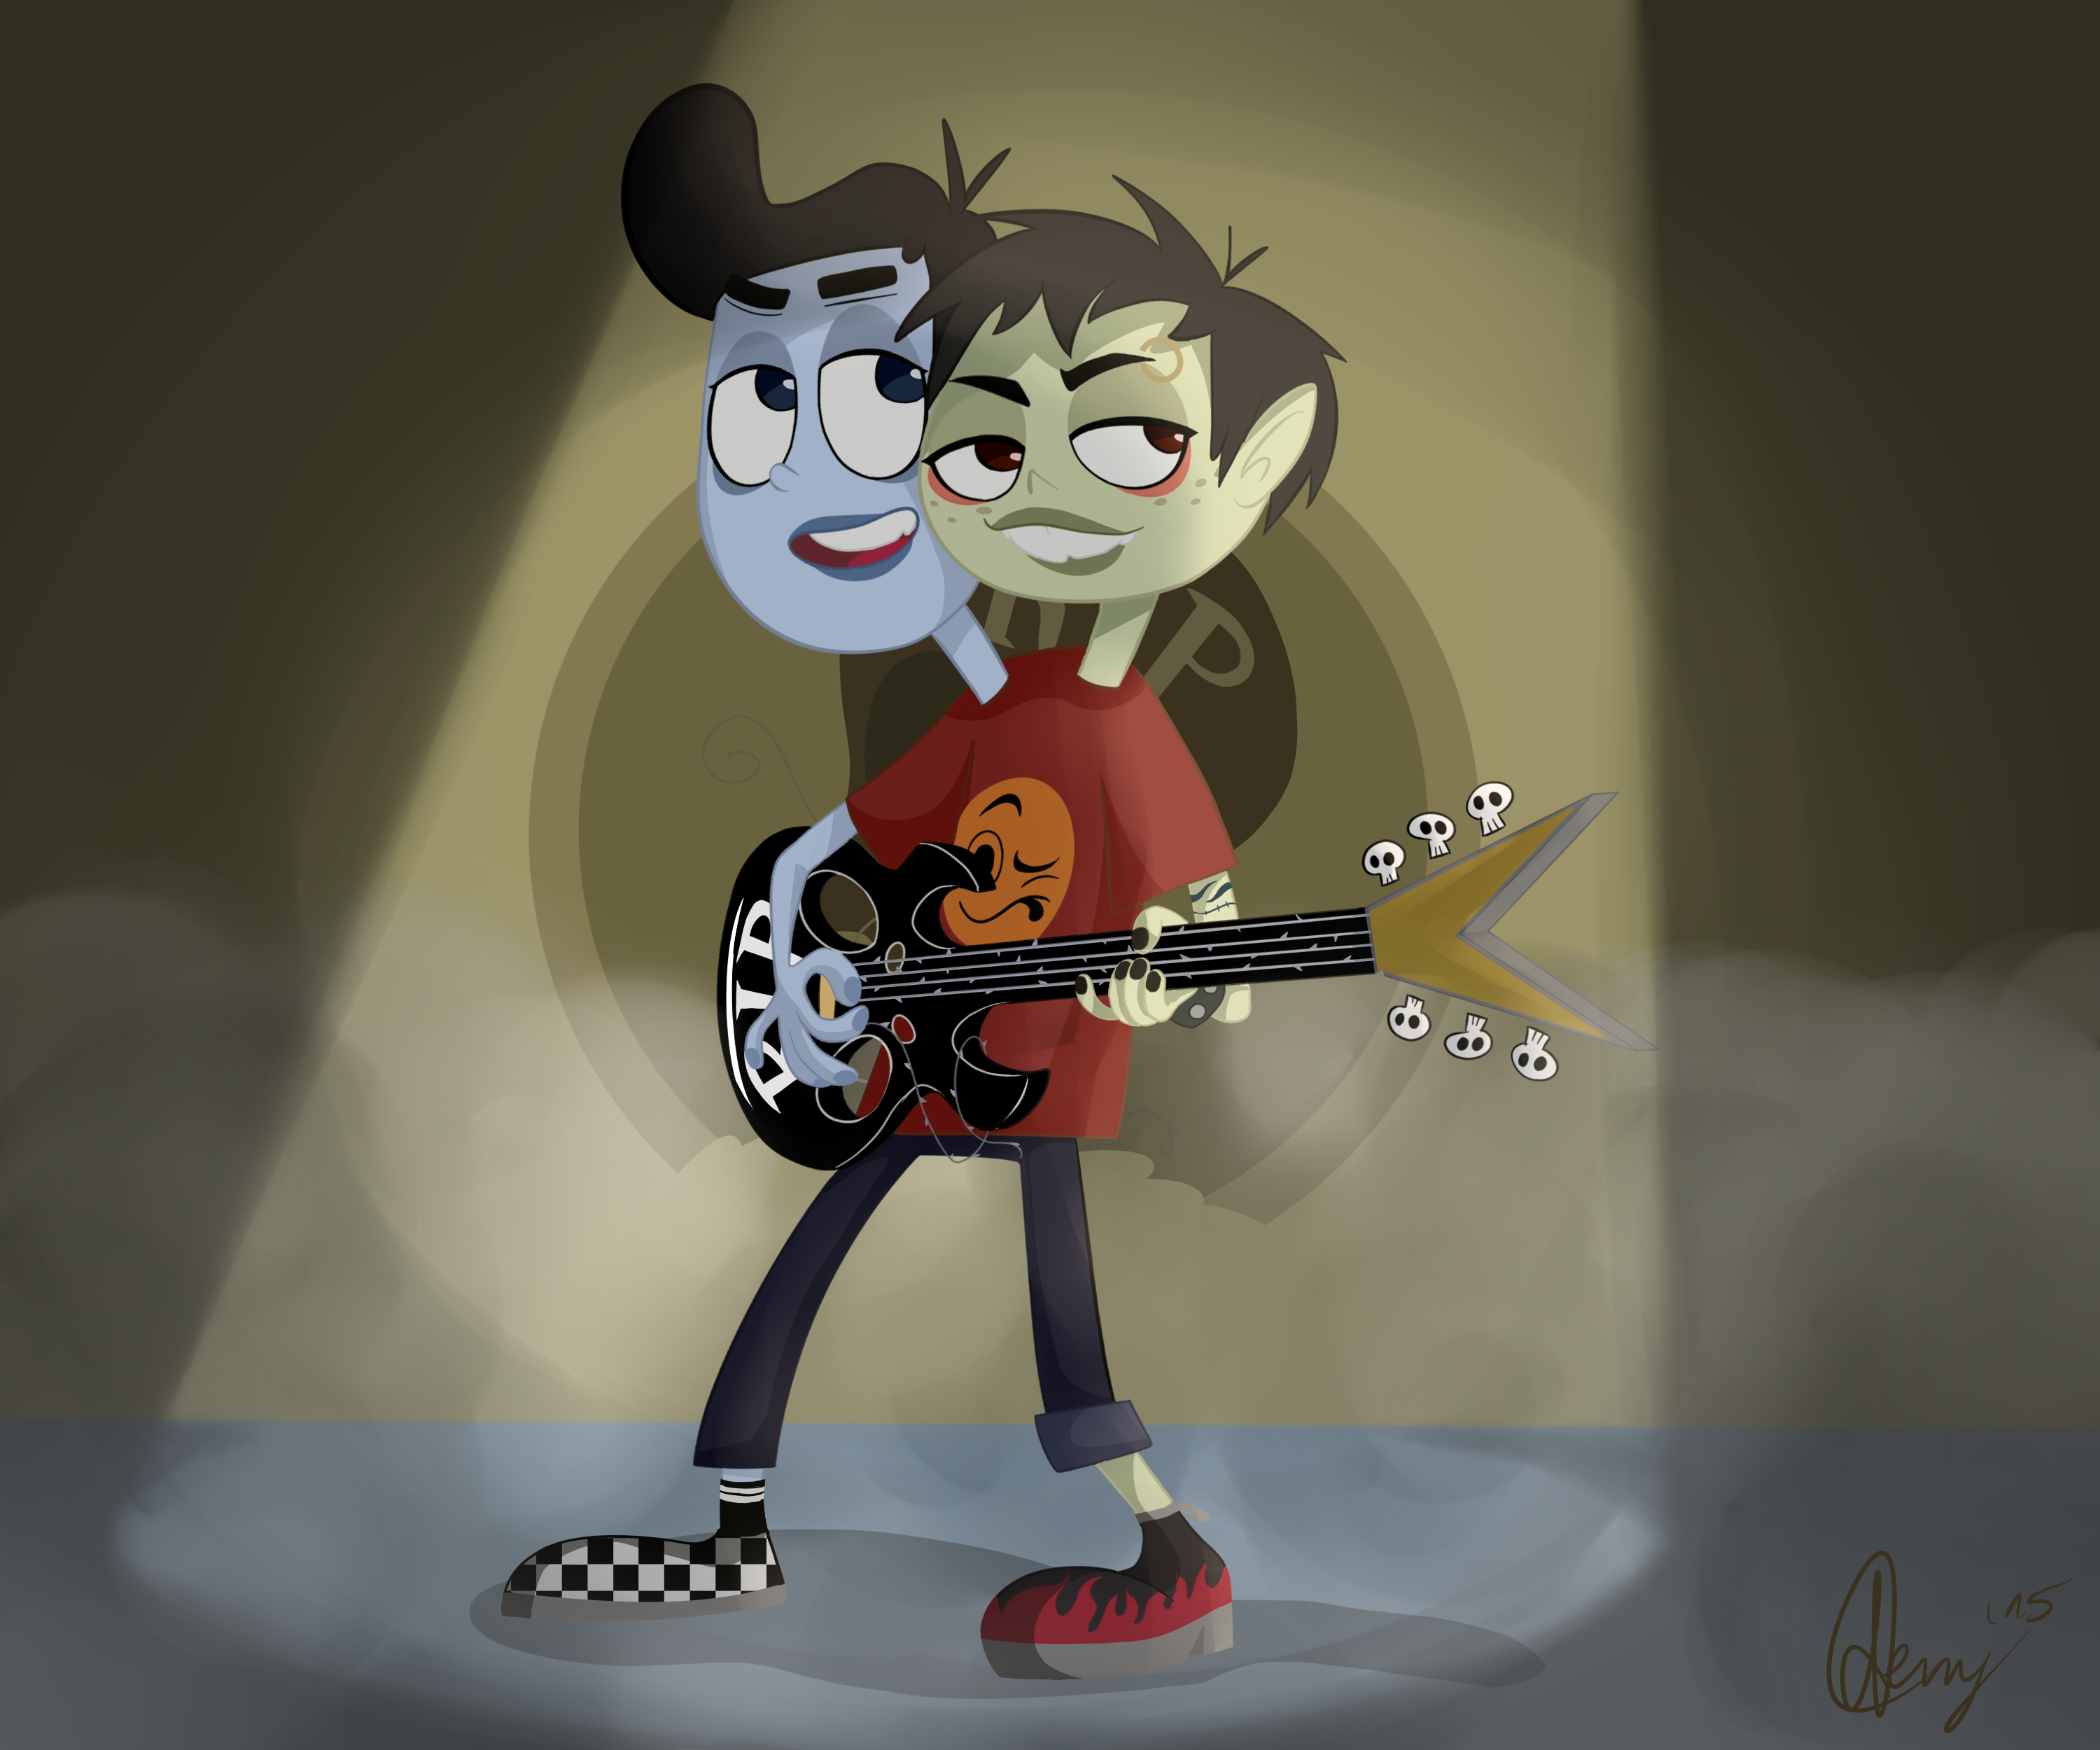 Frank and Len by HeyDeny on DeviantArt.